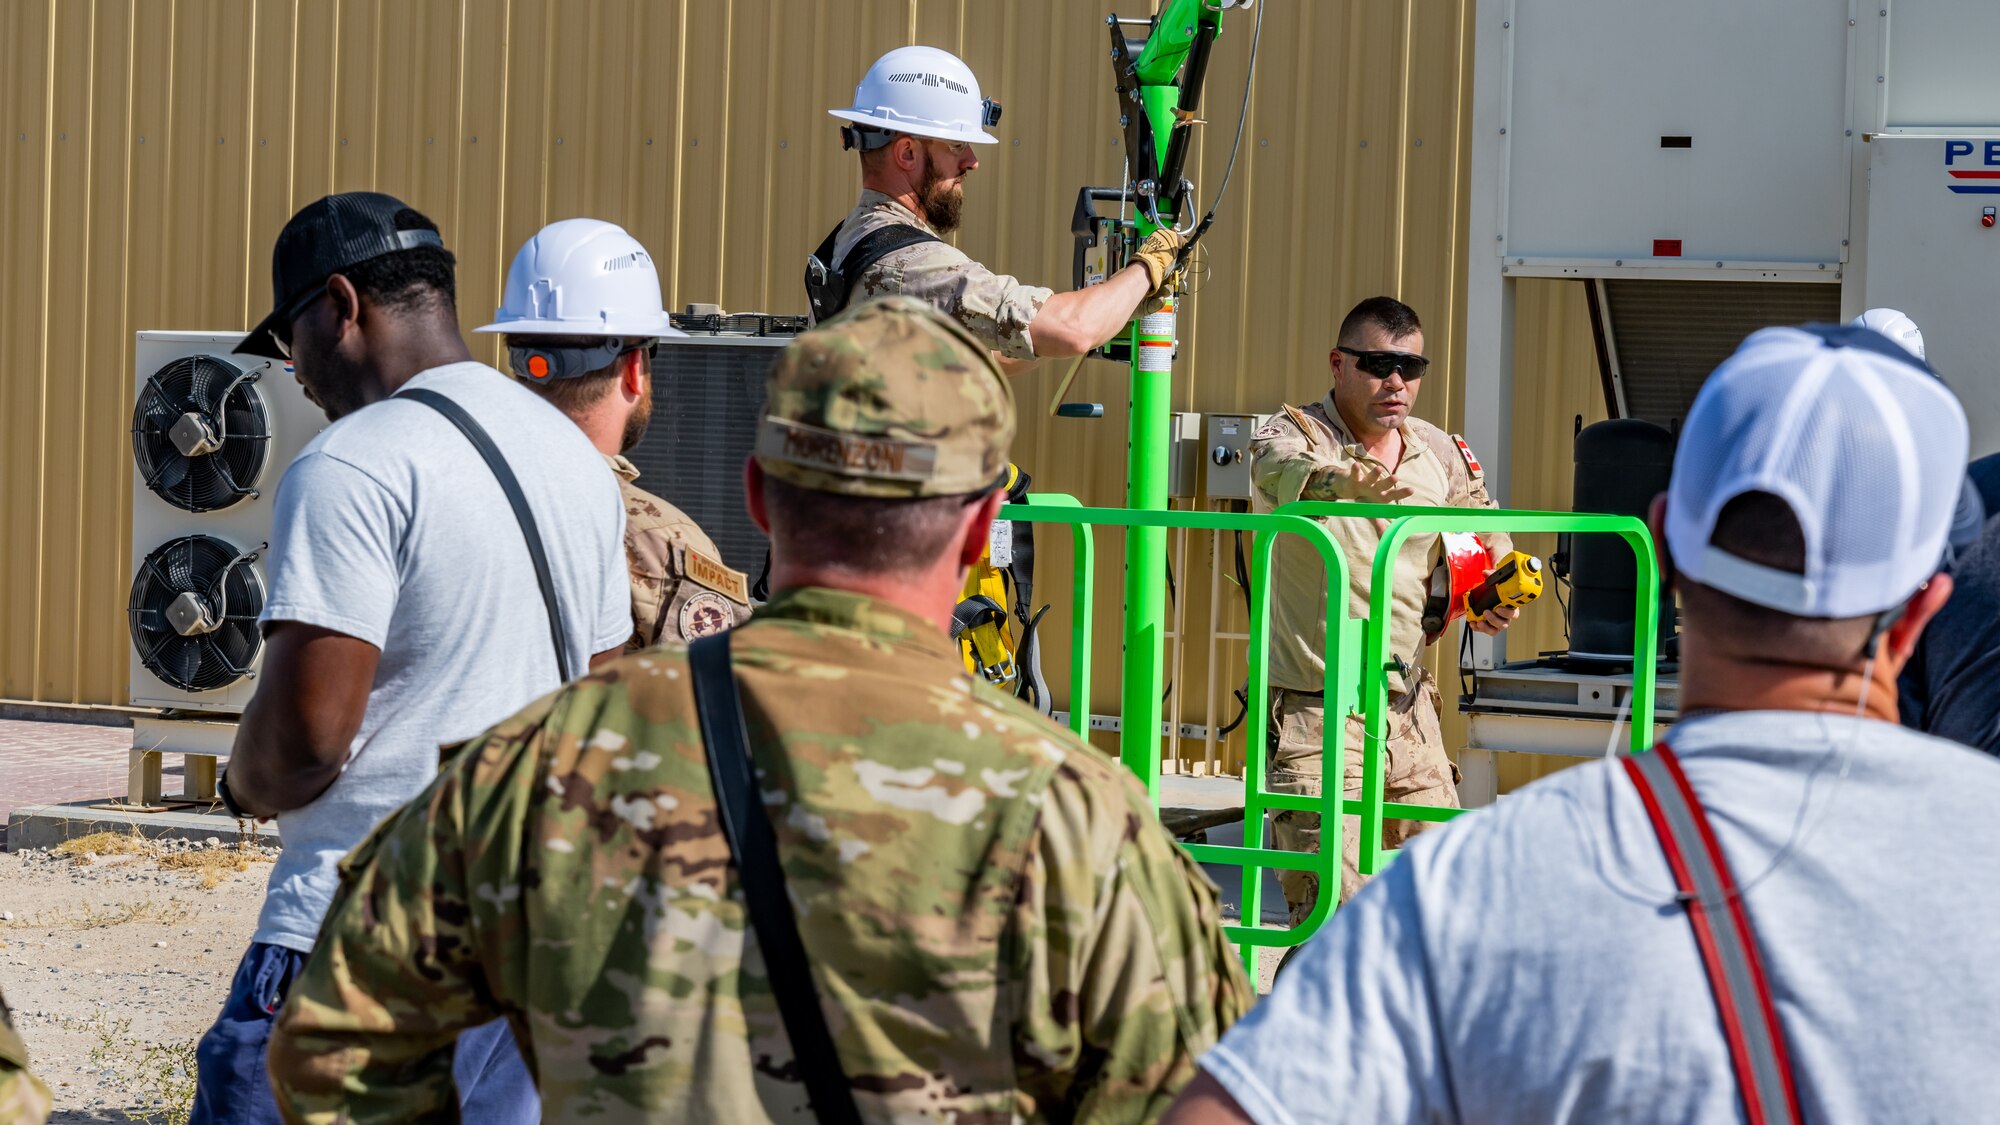 Canadian armed forces members teach a group of U.S. Air Force Airmen about the equipment they use to perform confined-space operations at Ali Al Salem Air Base, Kuwait, July 25, 2023. This confined-space training allowed for the U.S. and our Canadian partners to share their knowledge and expertise, thus reducing the risks associated with confined-space operations for all. (U.S. Air Force photo by Staff Sgt. Kevin Long)